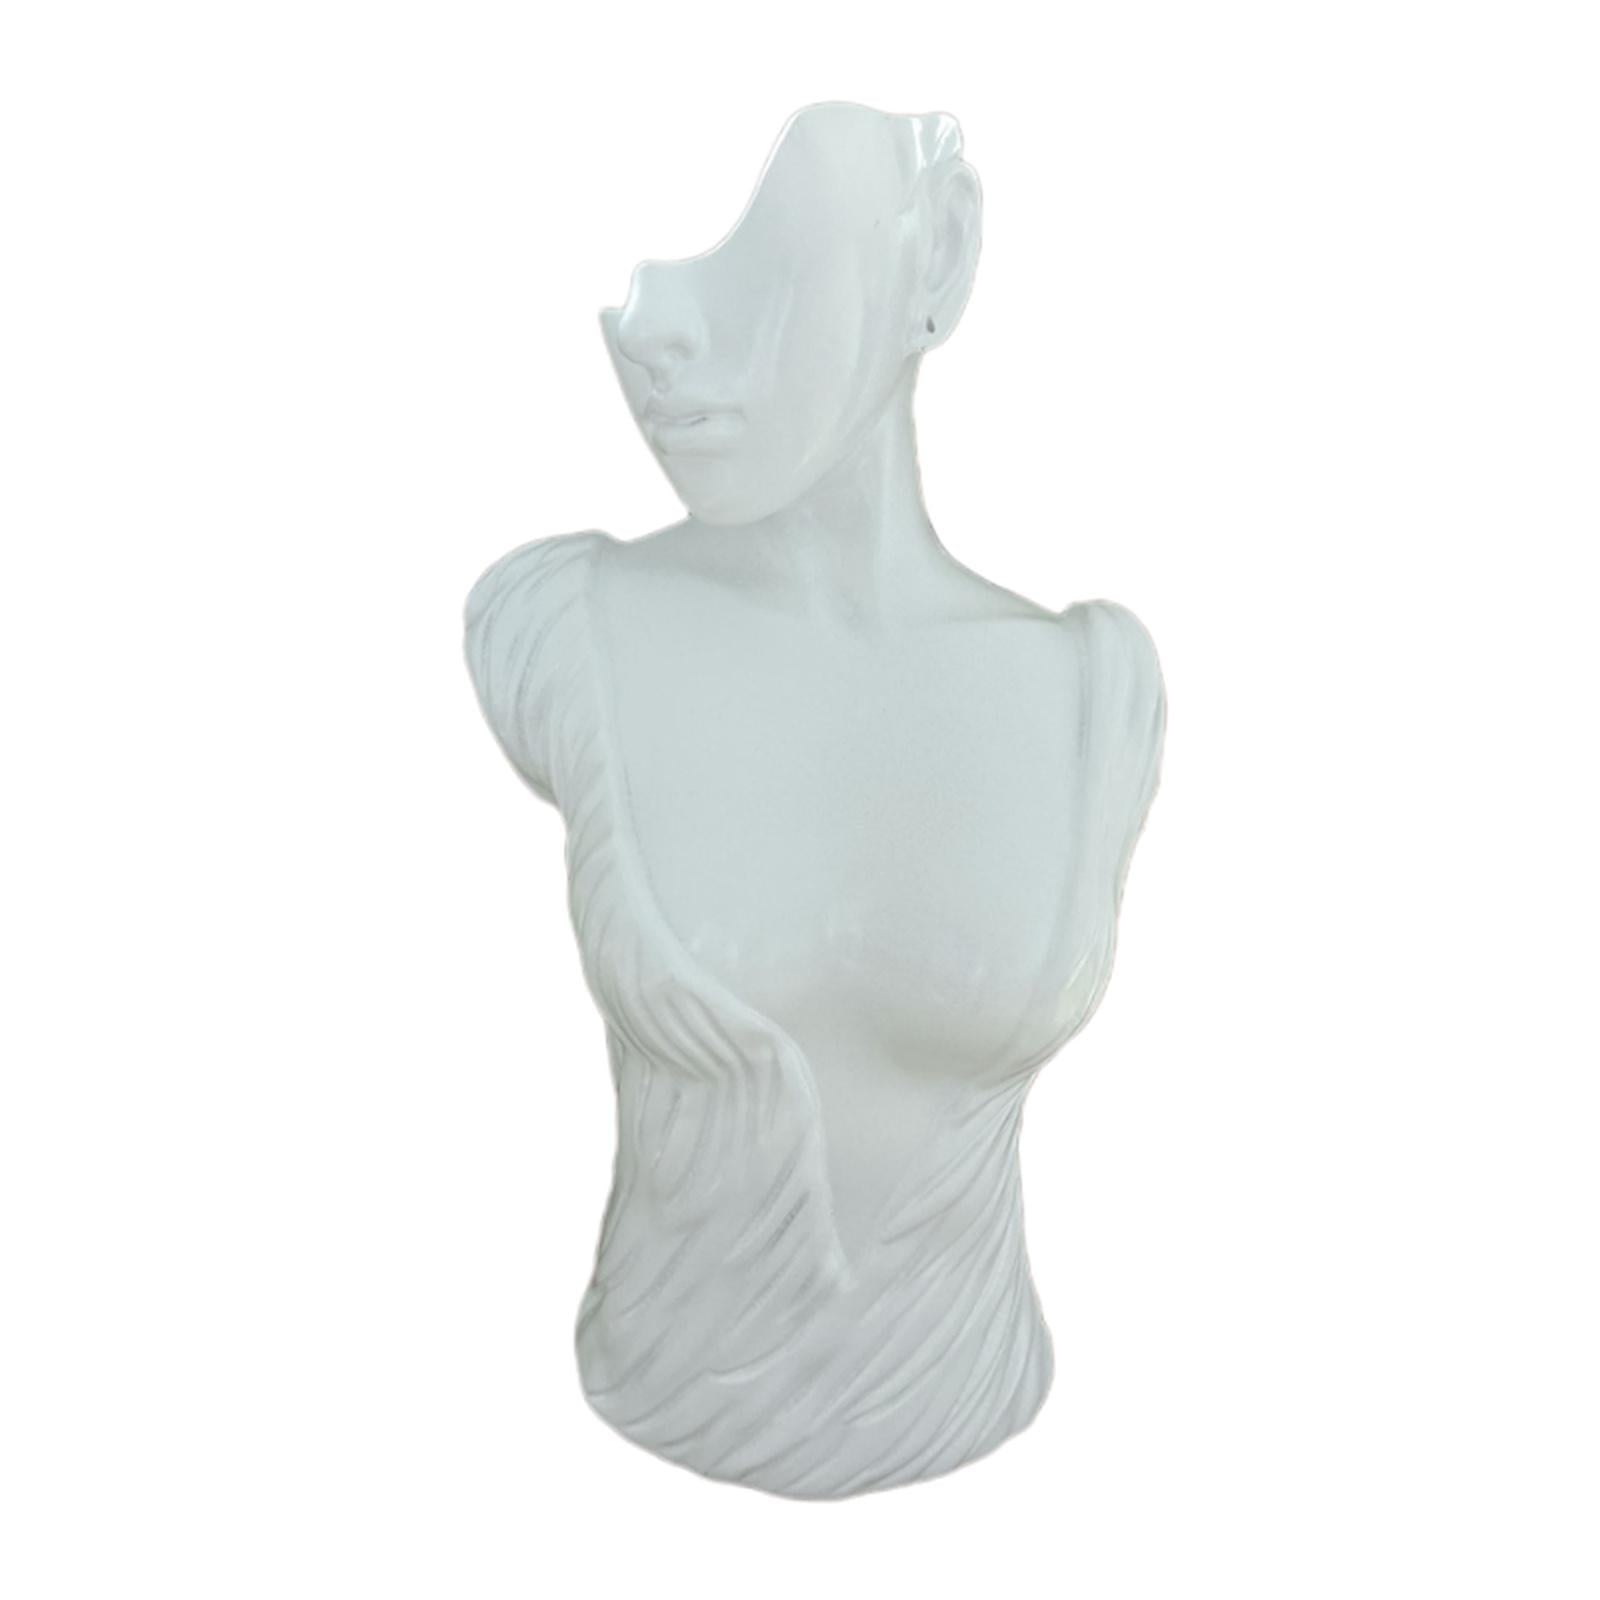 Resin Mannequin Necklace Earring Jewelry Display Head Bust Stand Holder Rack 